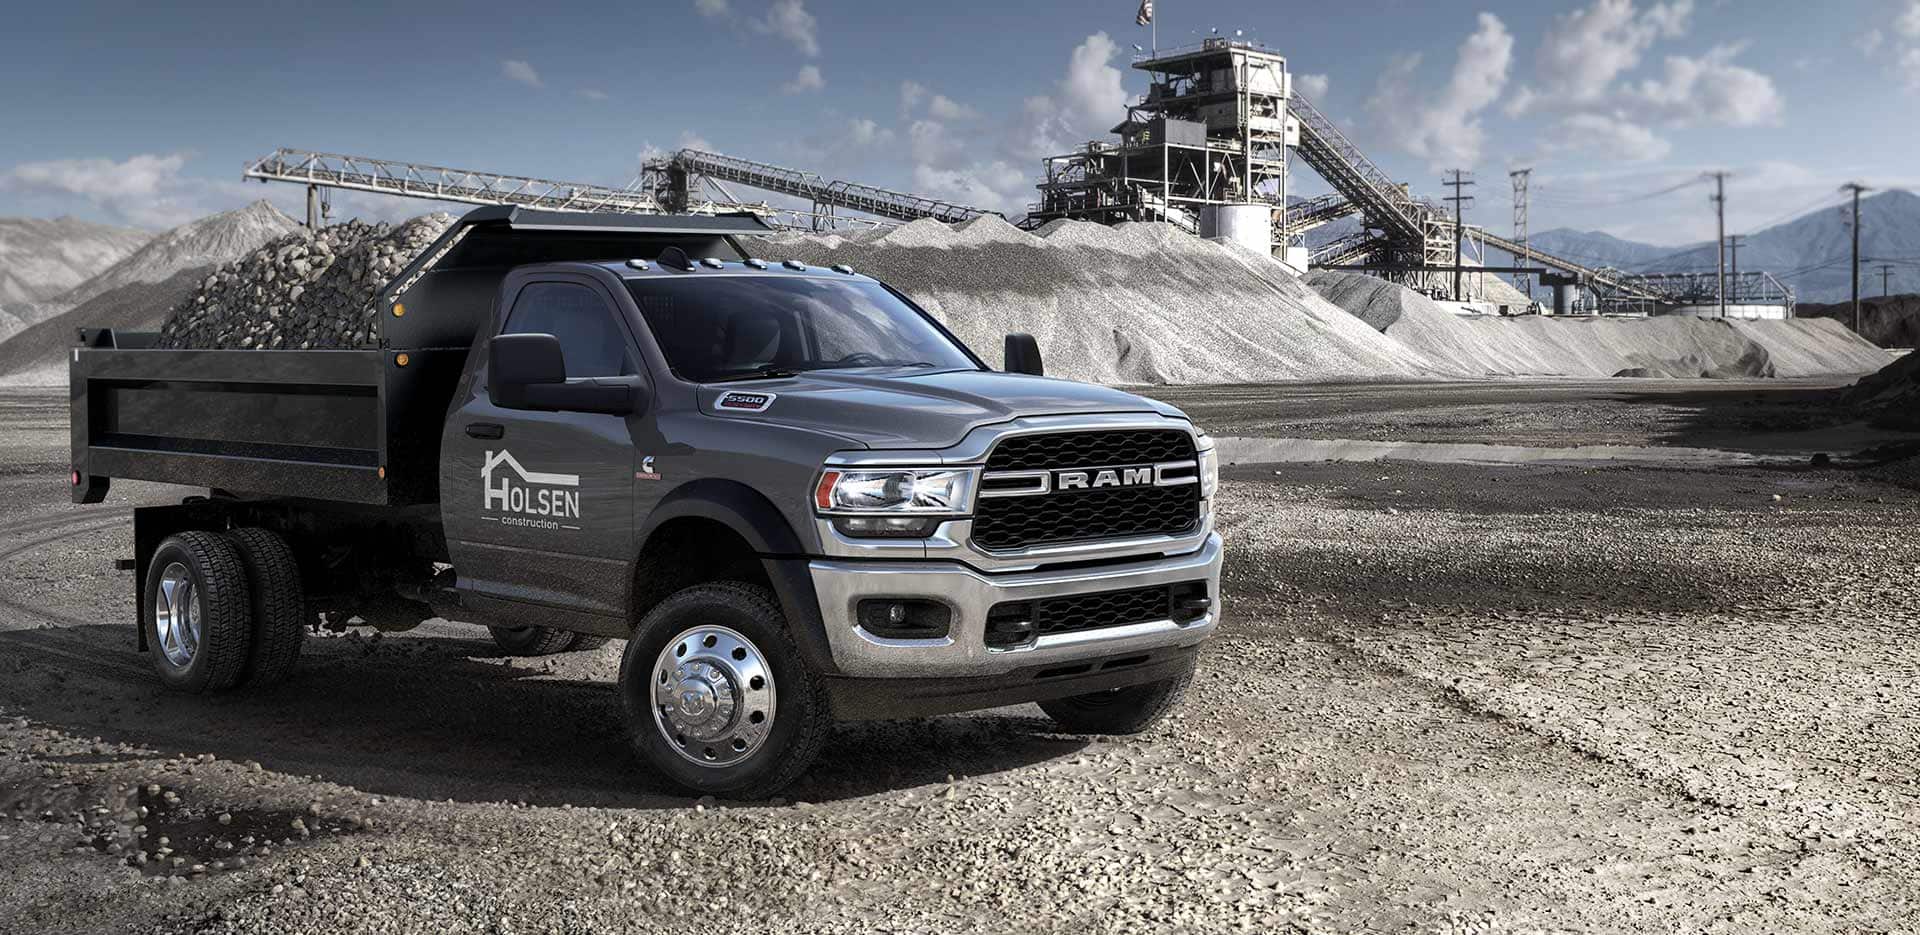 Display A 2023 Ram Chassis Cab with a dump body upfit loaded with gravel and a construction company name and logo on the passenger-side door.